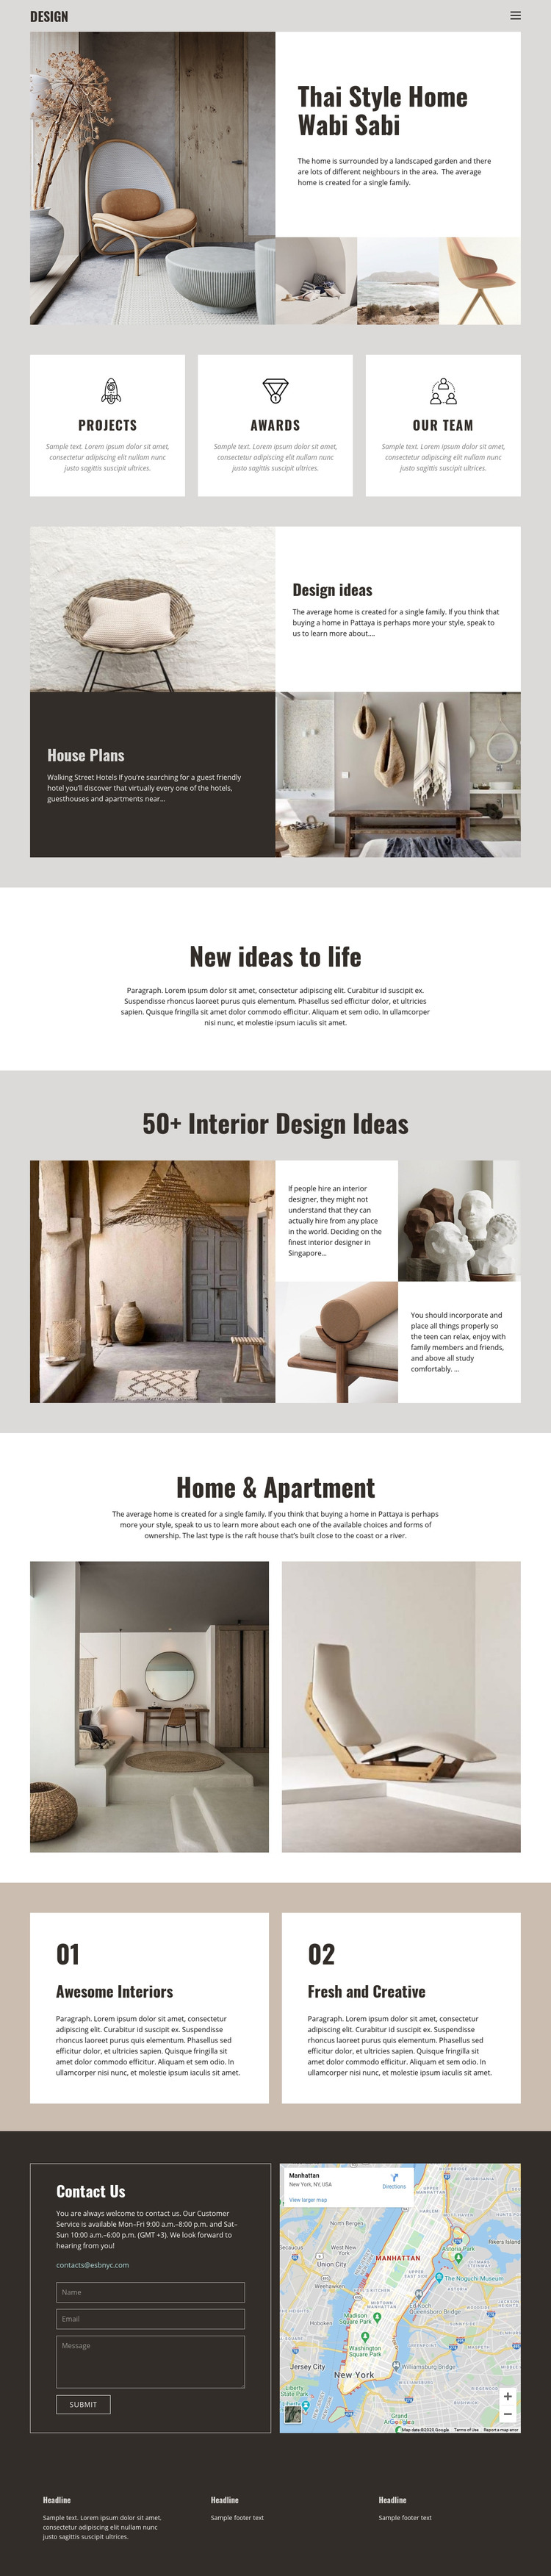 Thai style for home design Homepage Design